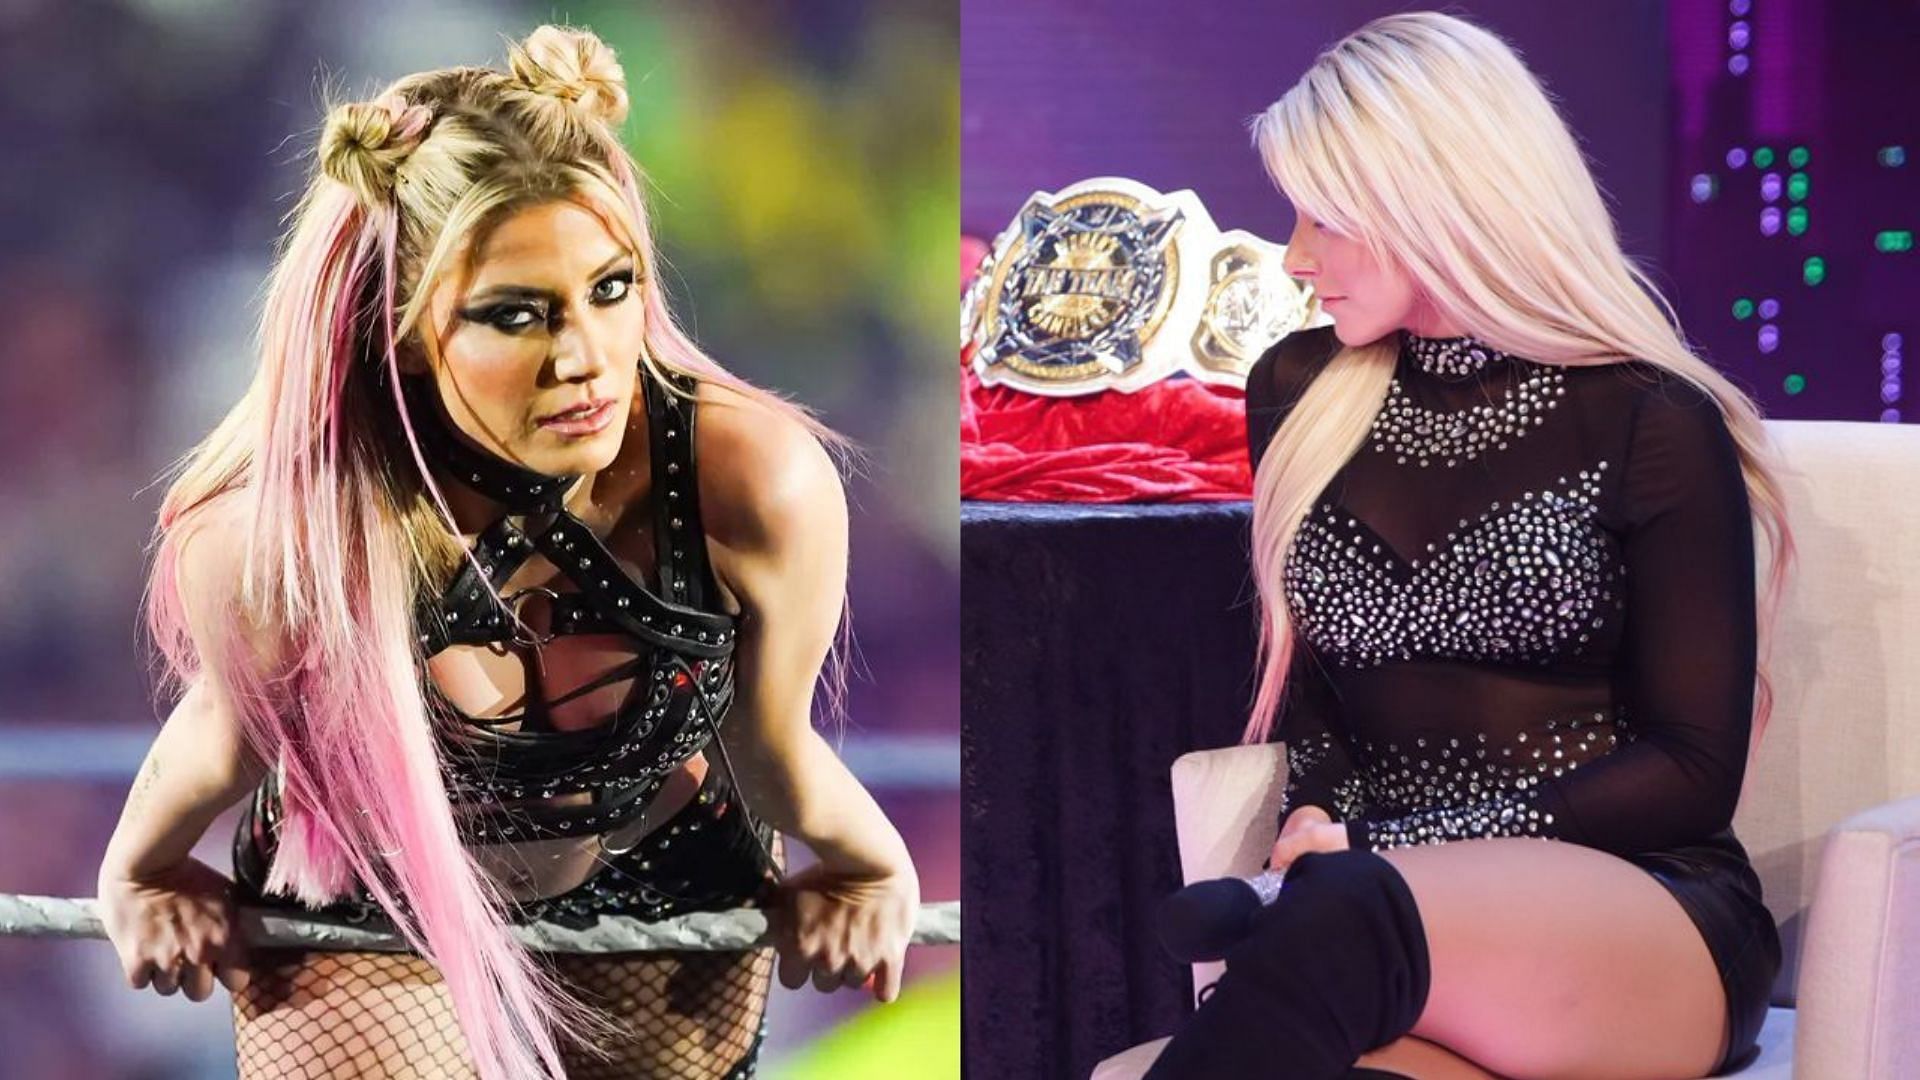 Alexa Bliss is currently absent from WWE programming